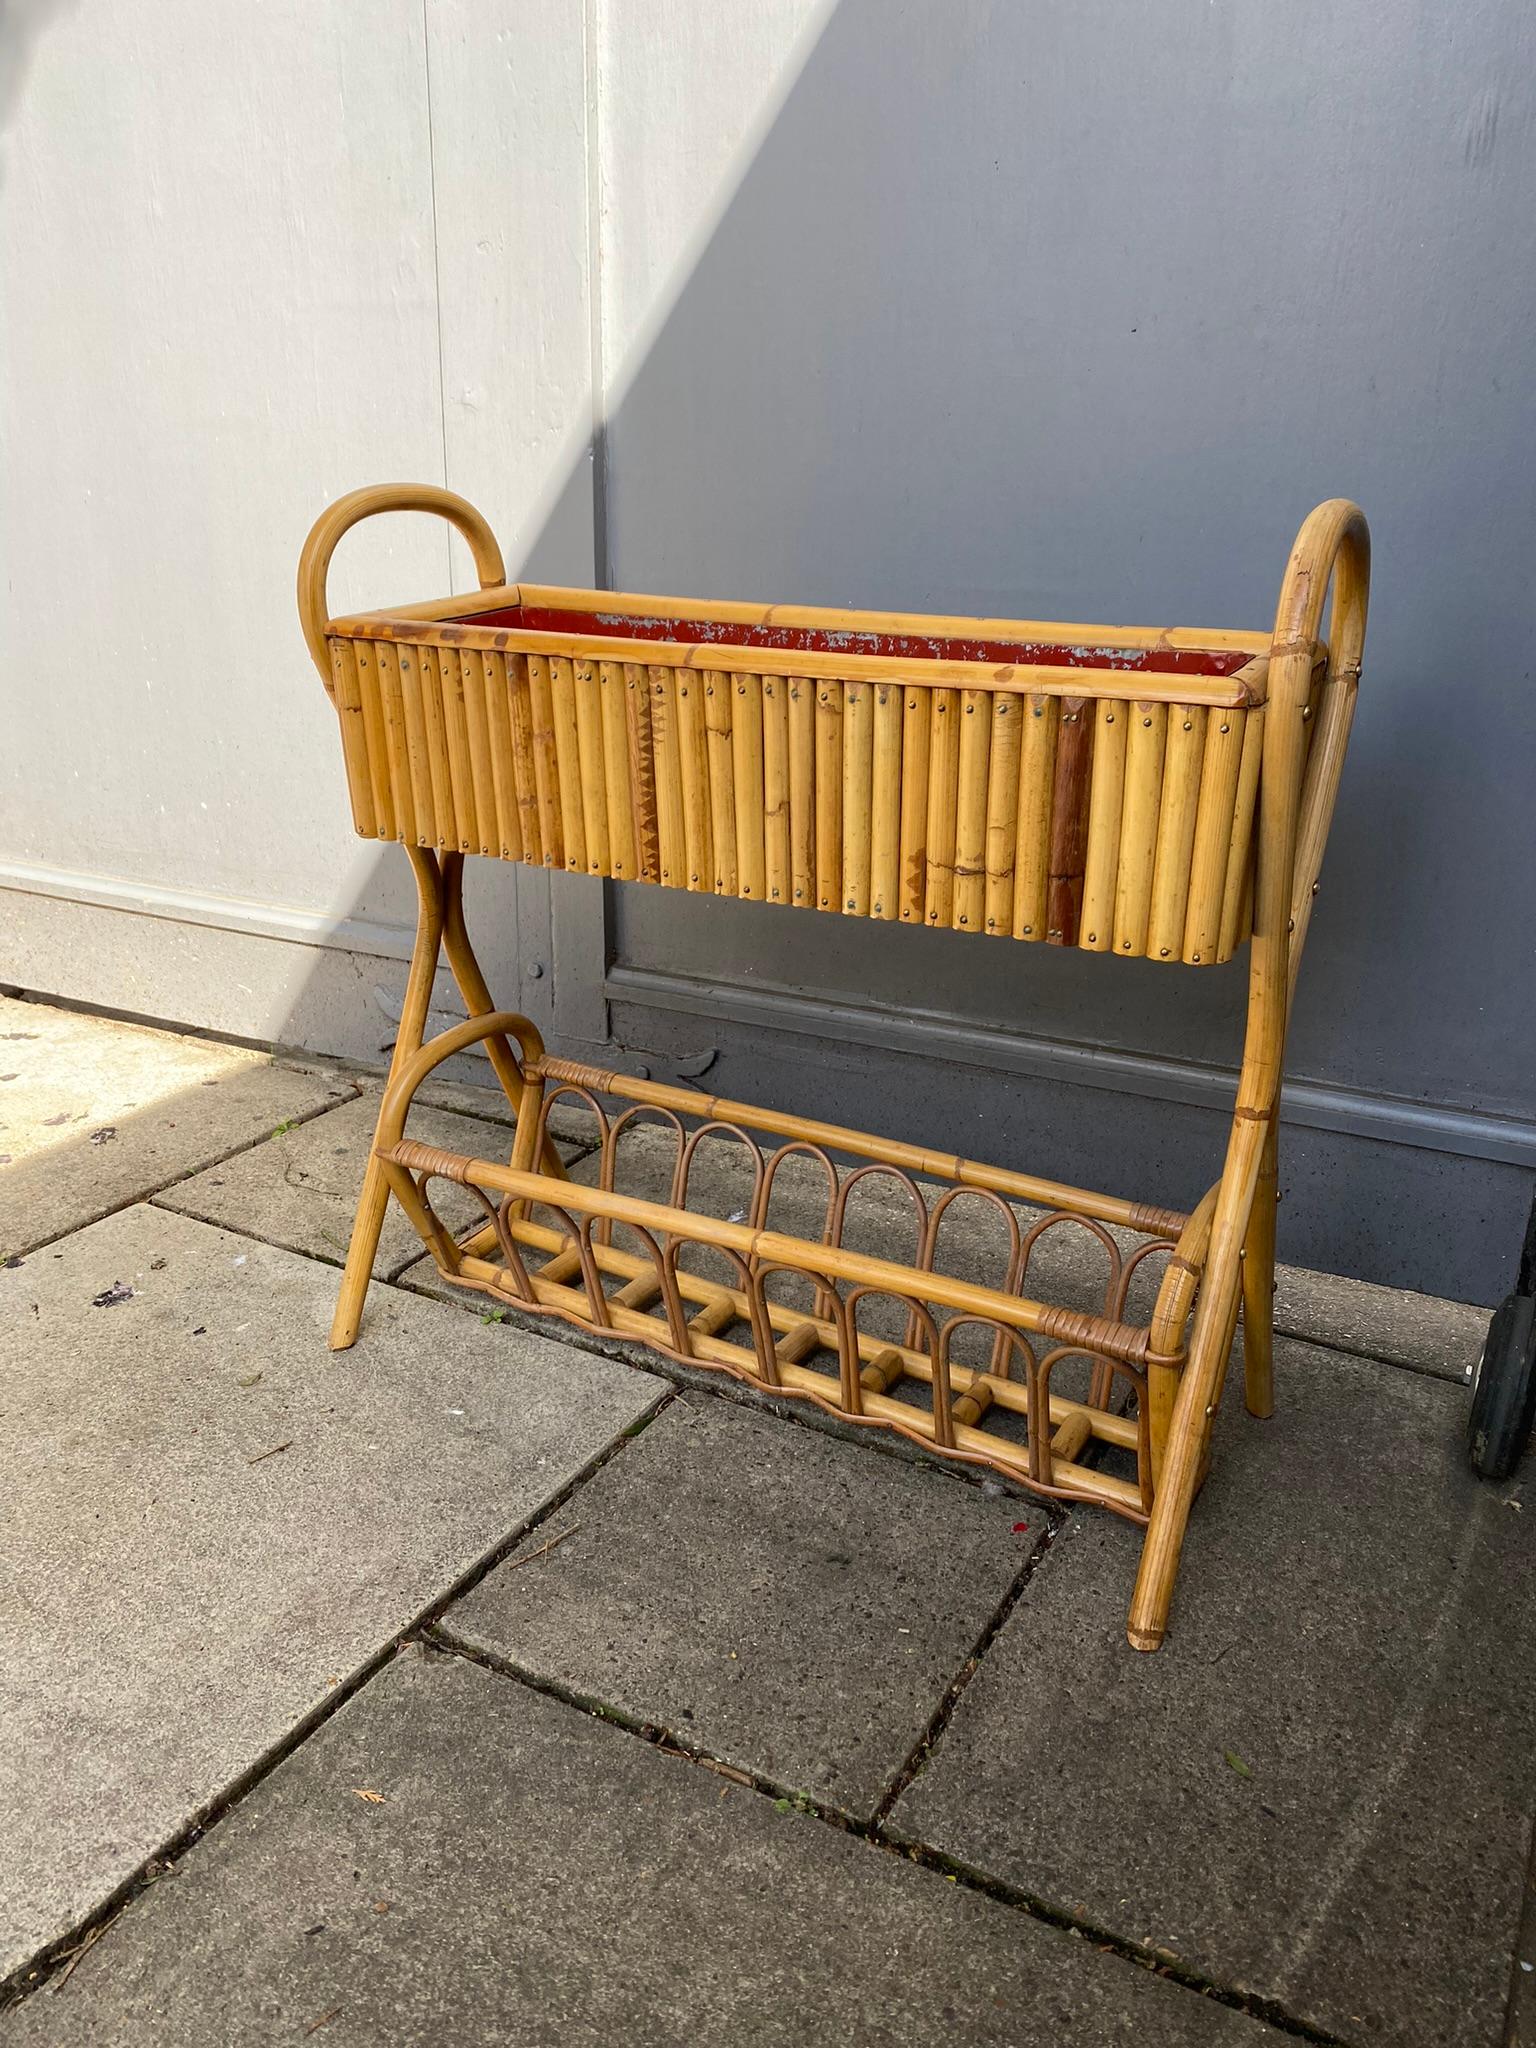 Pretty French bamboo / rattan jardinière planter. Constructed from a rattan frame with decorative bamboo vertical uprights.

The two-tier design has an open shelf on bottom to hold additional pots.

Inside the trough is a red metal liner with